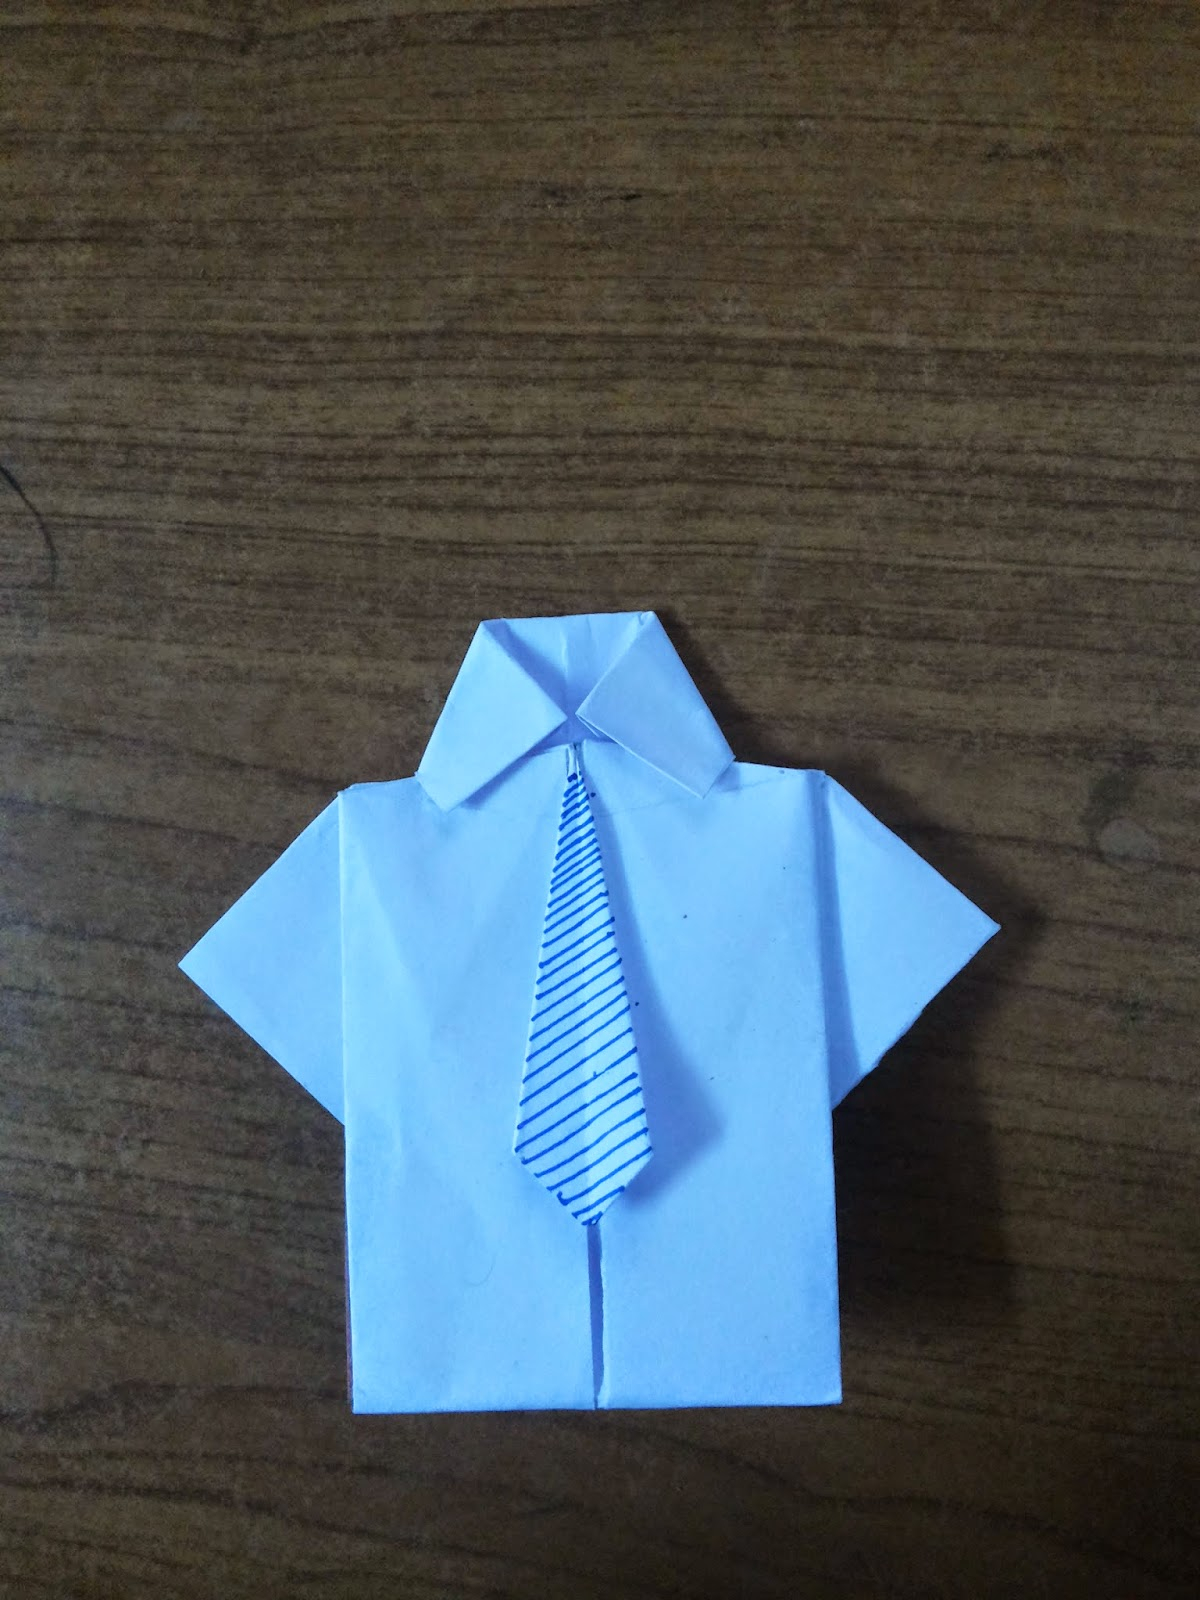 Origami Shirt And Tie Shirt Tie Card